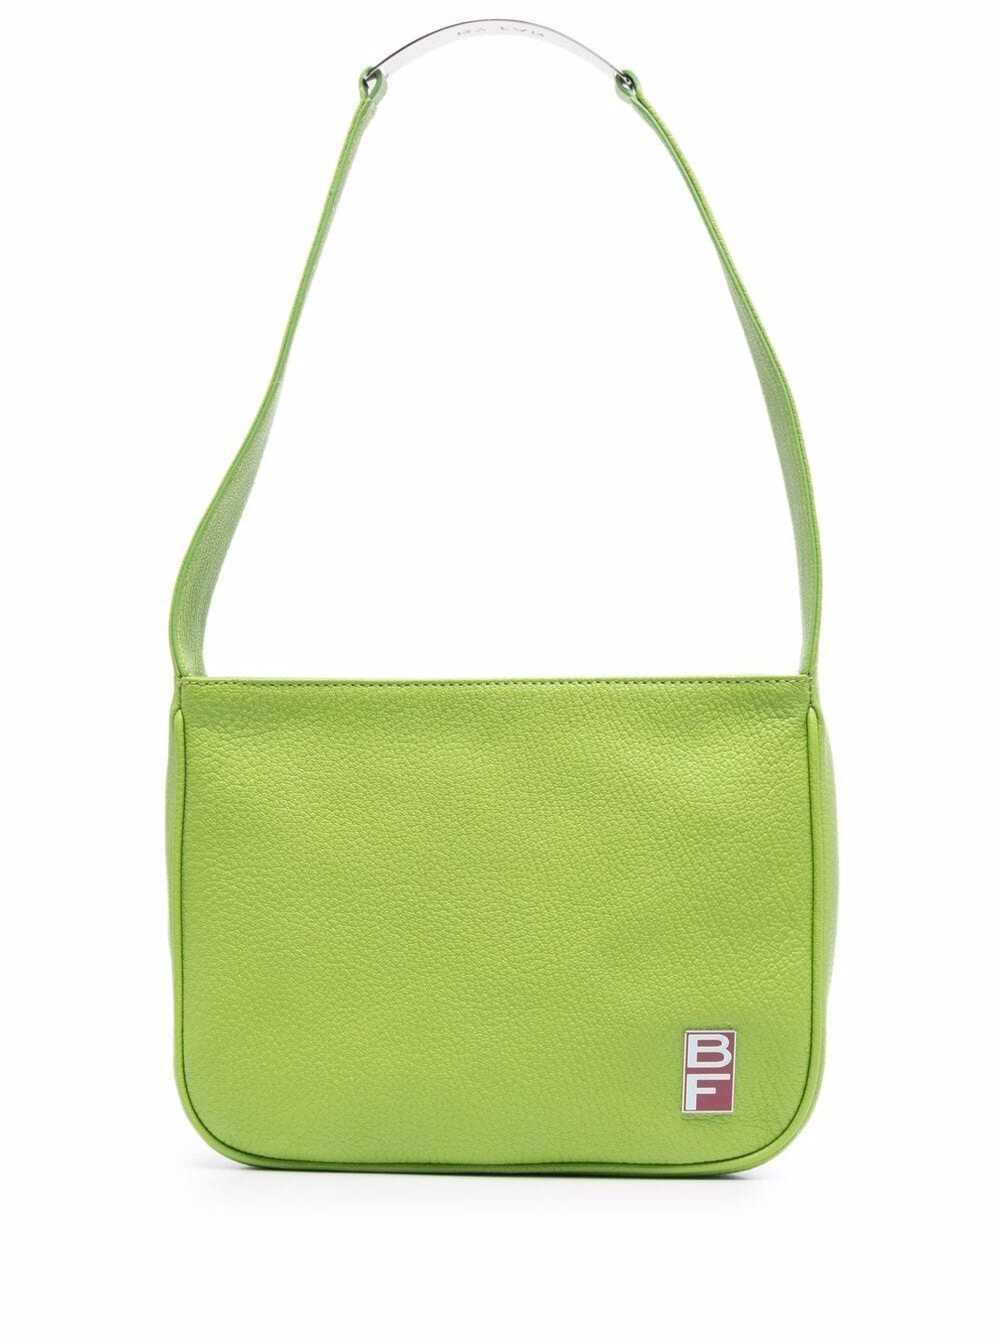 BY FAR Venic Green Leather Shoulder Bag